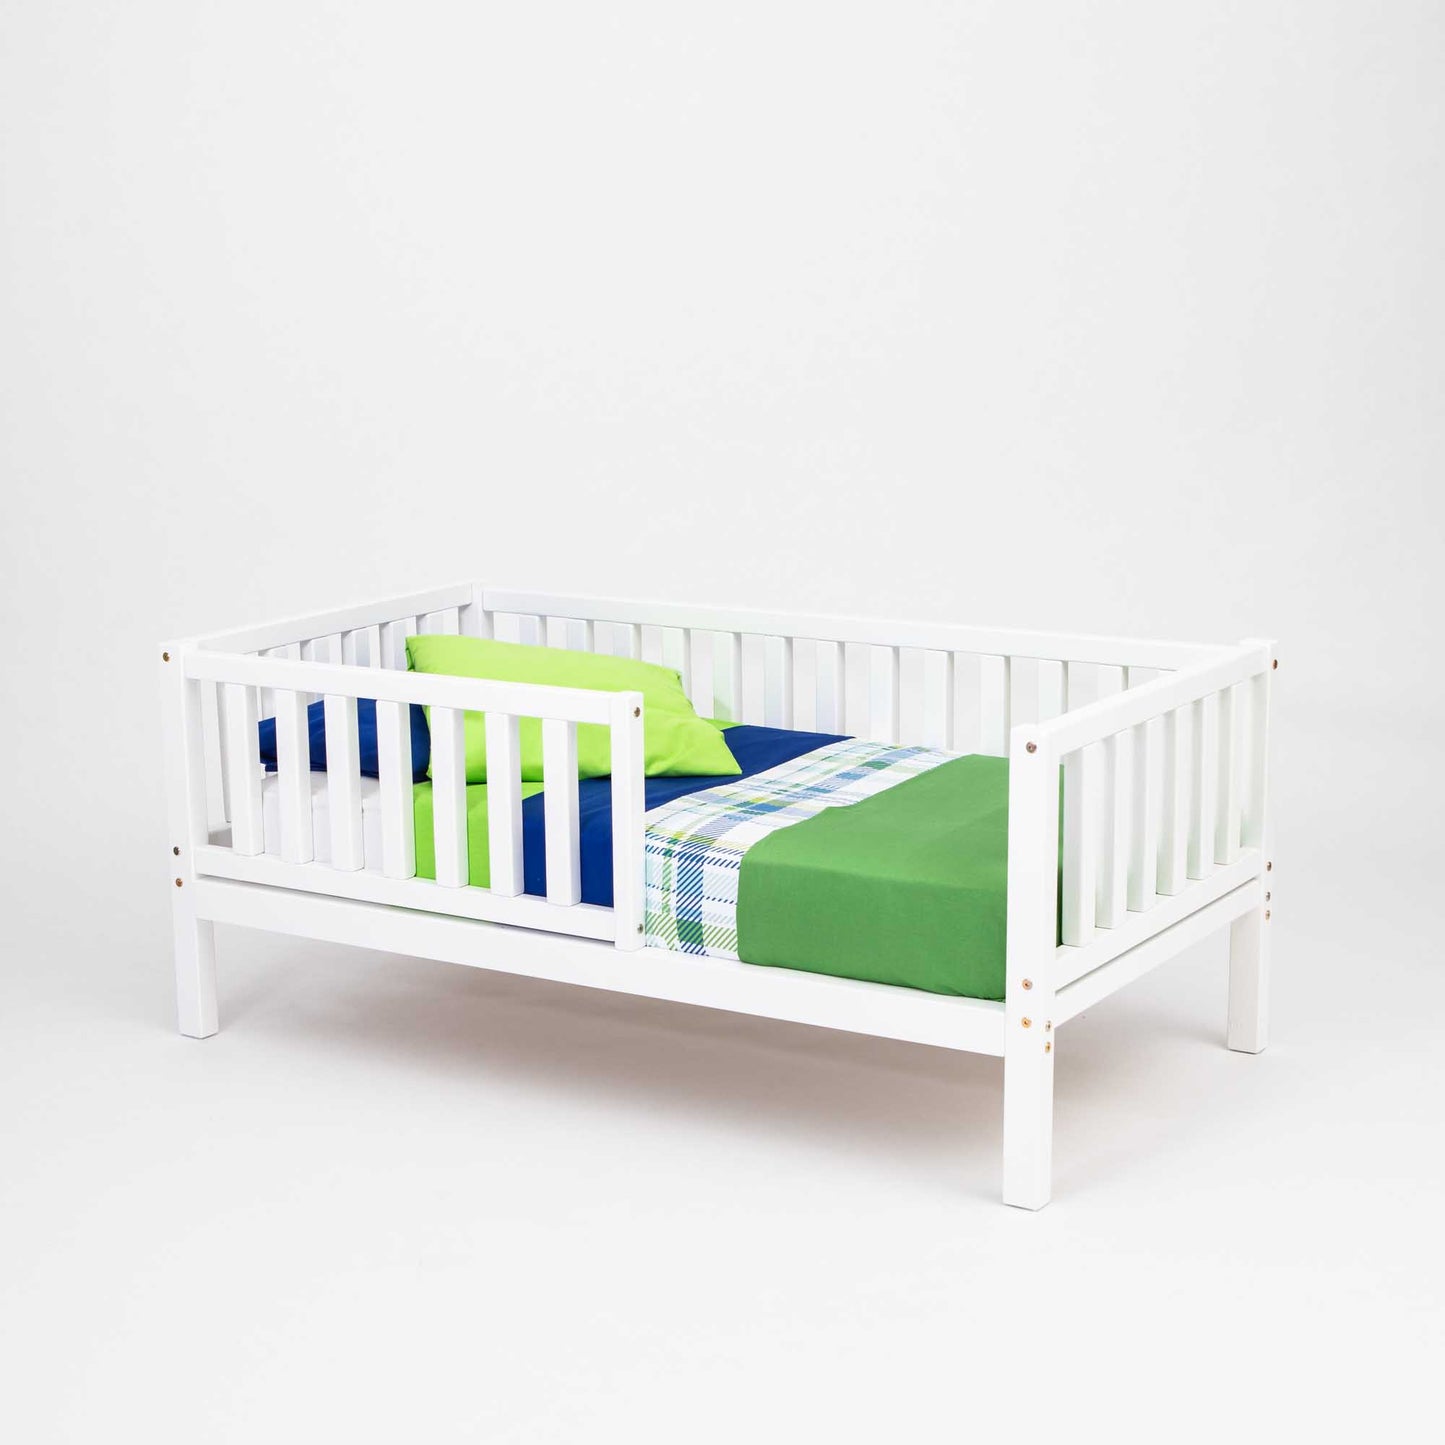 A Sweet Home From Wood toddler bed on legs with a fence and green and blue bedding for independent sleeping.